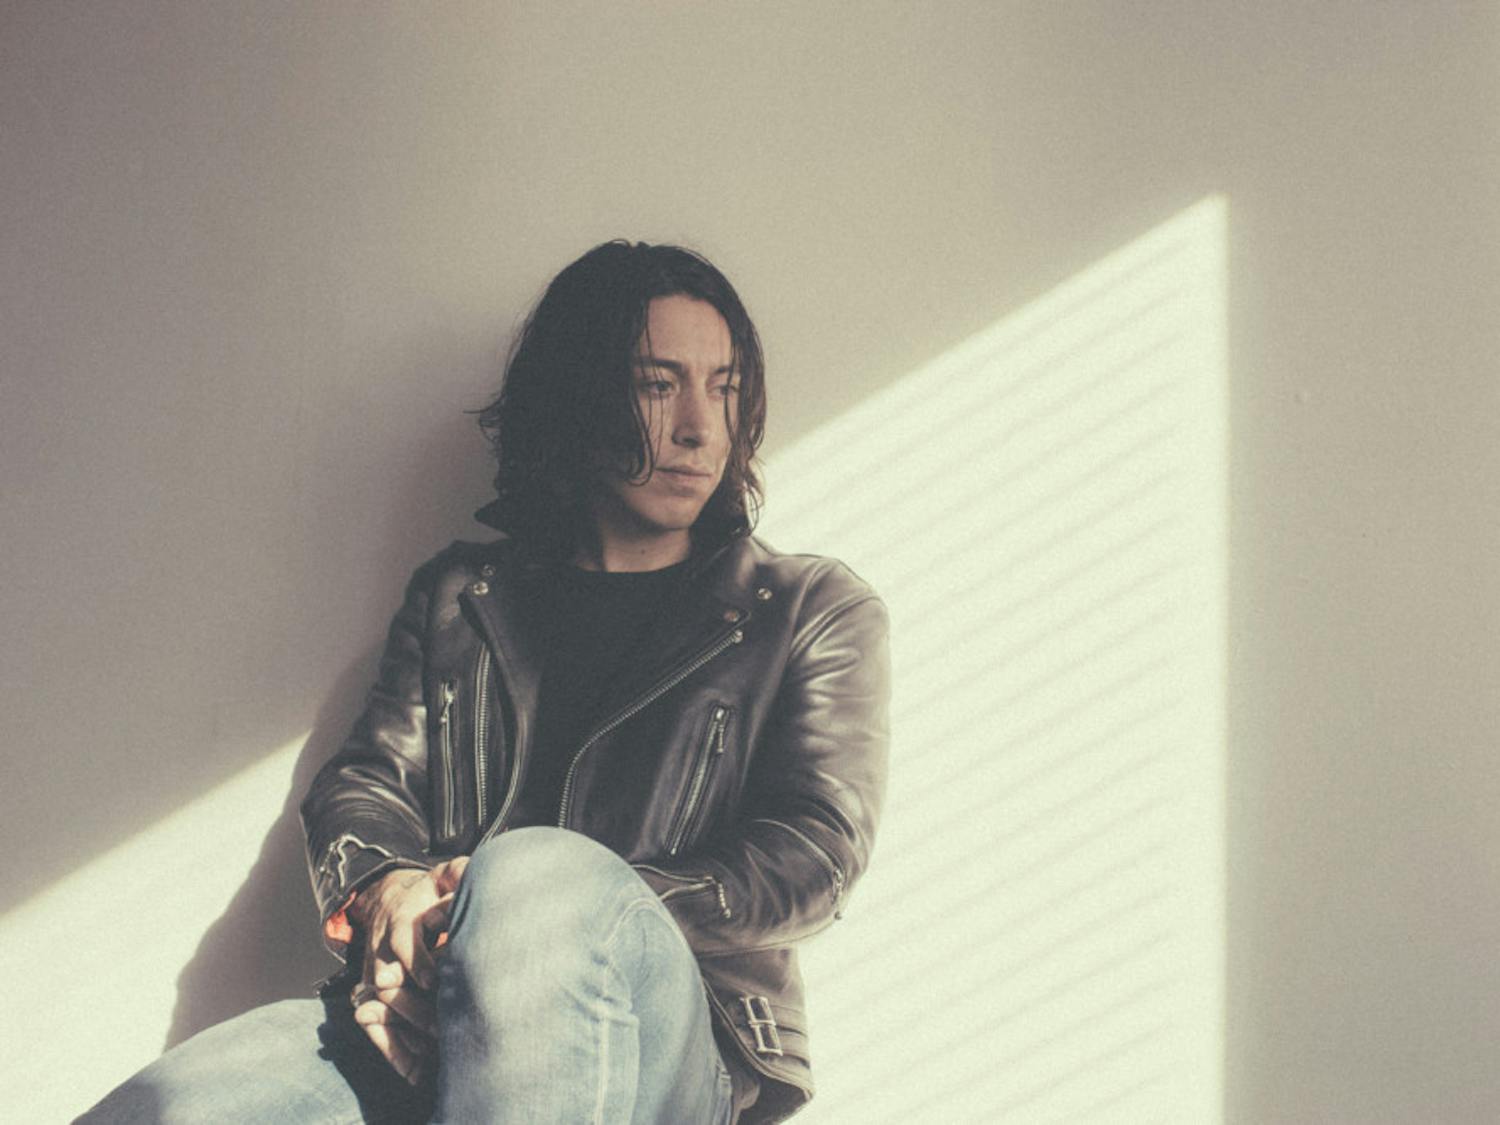 Folk artist Noah Gundersen will be performing at 9:30 p.m. on Friday at High Dive, located at 210 SW Second Ave. Doors open at 9 p.m., and tickets are available for $14 at the door or for $12 in advance on ticketfly.com.